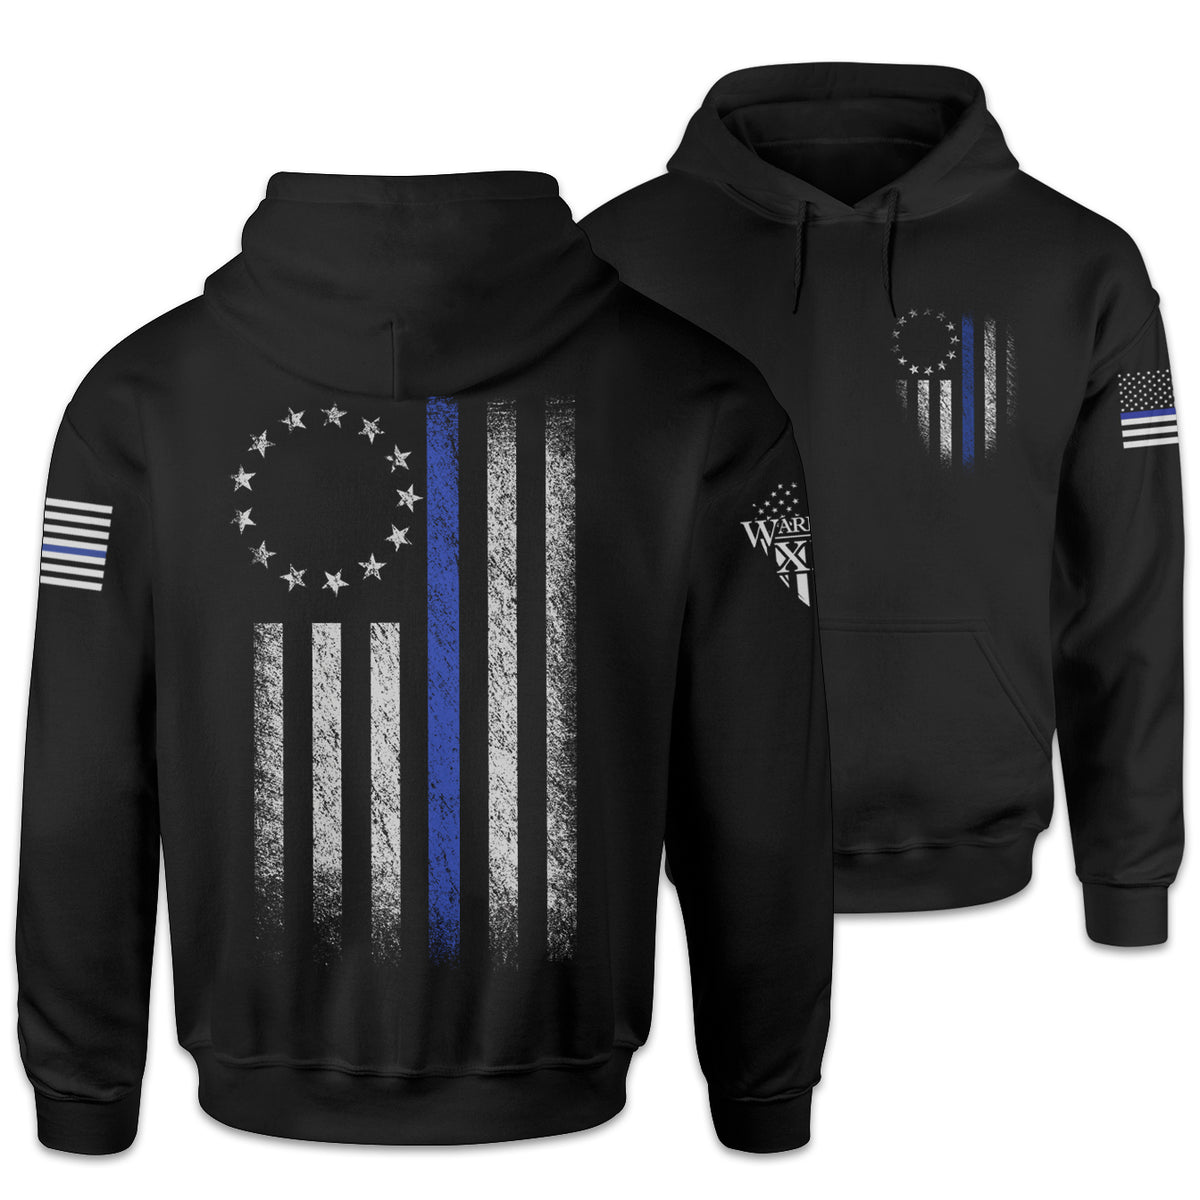 Front & back black hoodie shirt that features a thin blue line Betsy Ross flag on a back print to show that we remain undeterred in our support for American law enforcement. printed on the shirt.